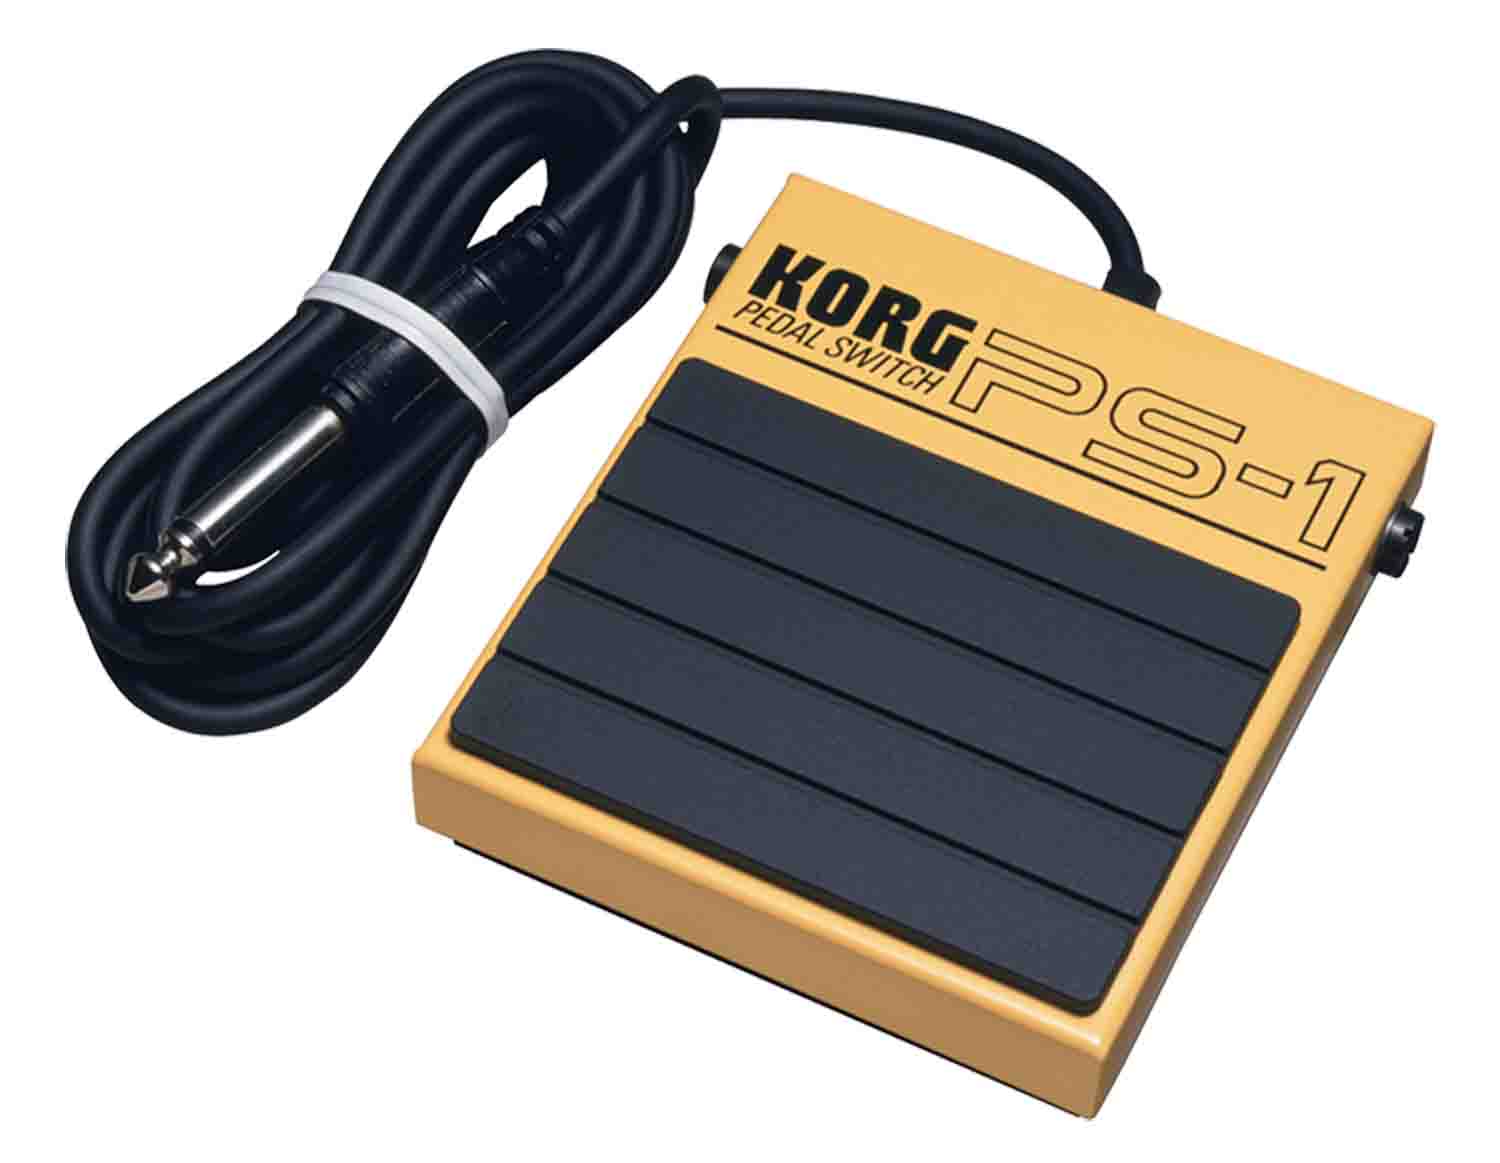 Korg PS-1 Pedal Switch for MIDI Keyboard - Hollywood DJ